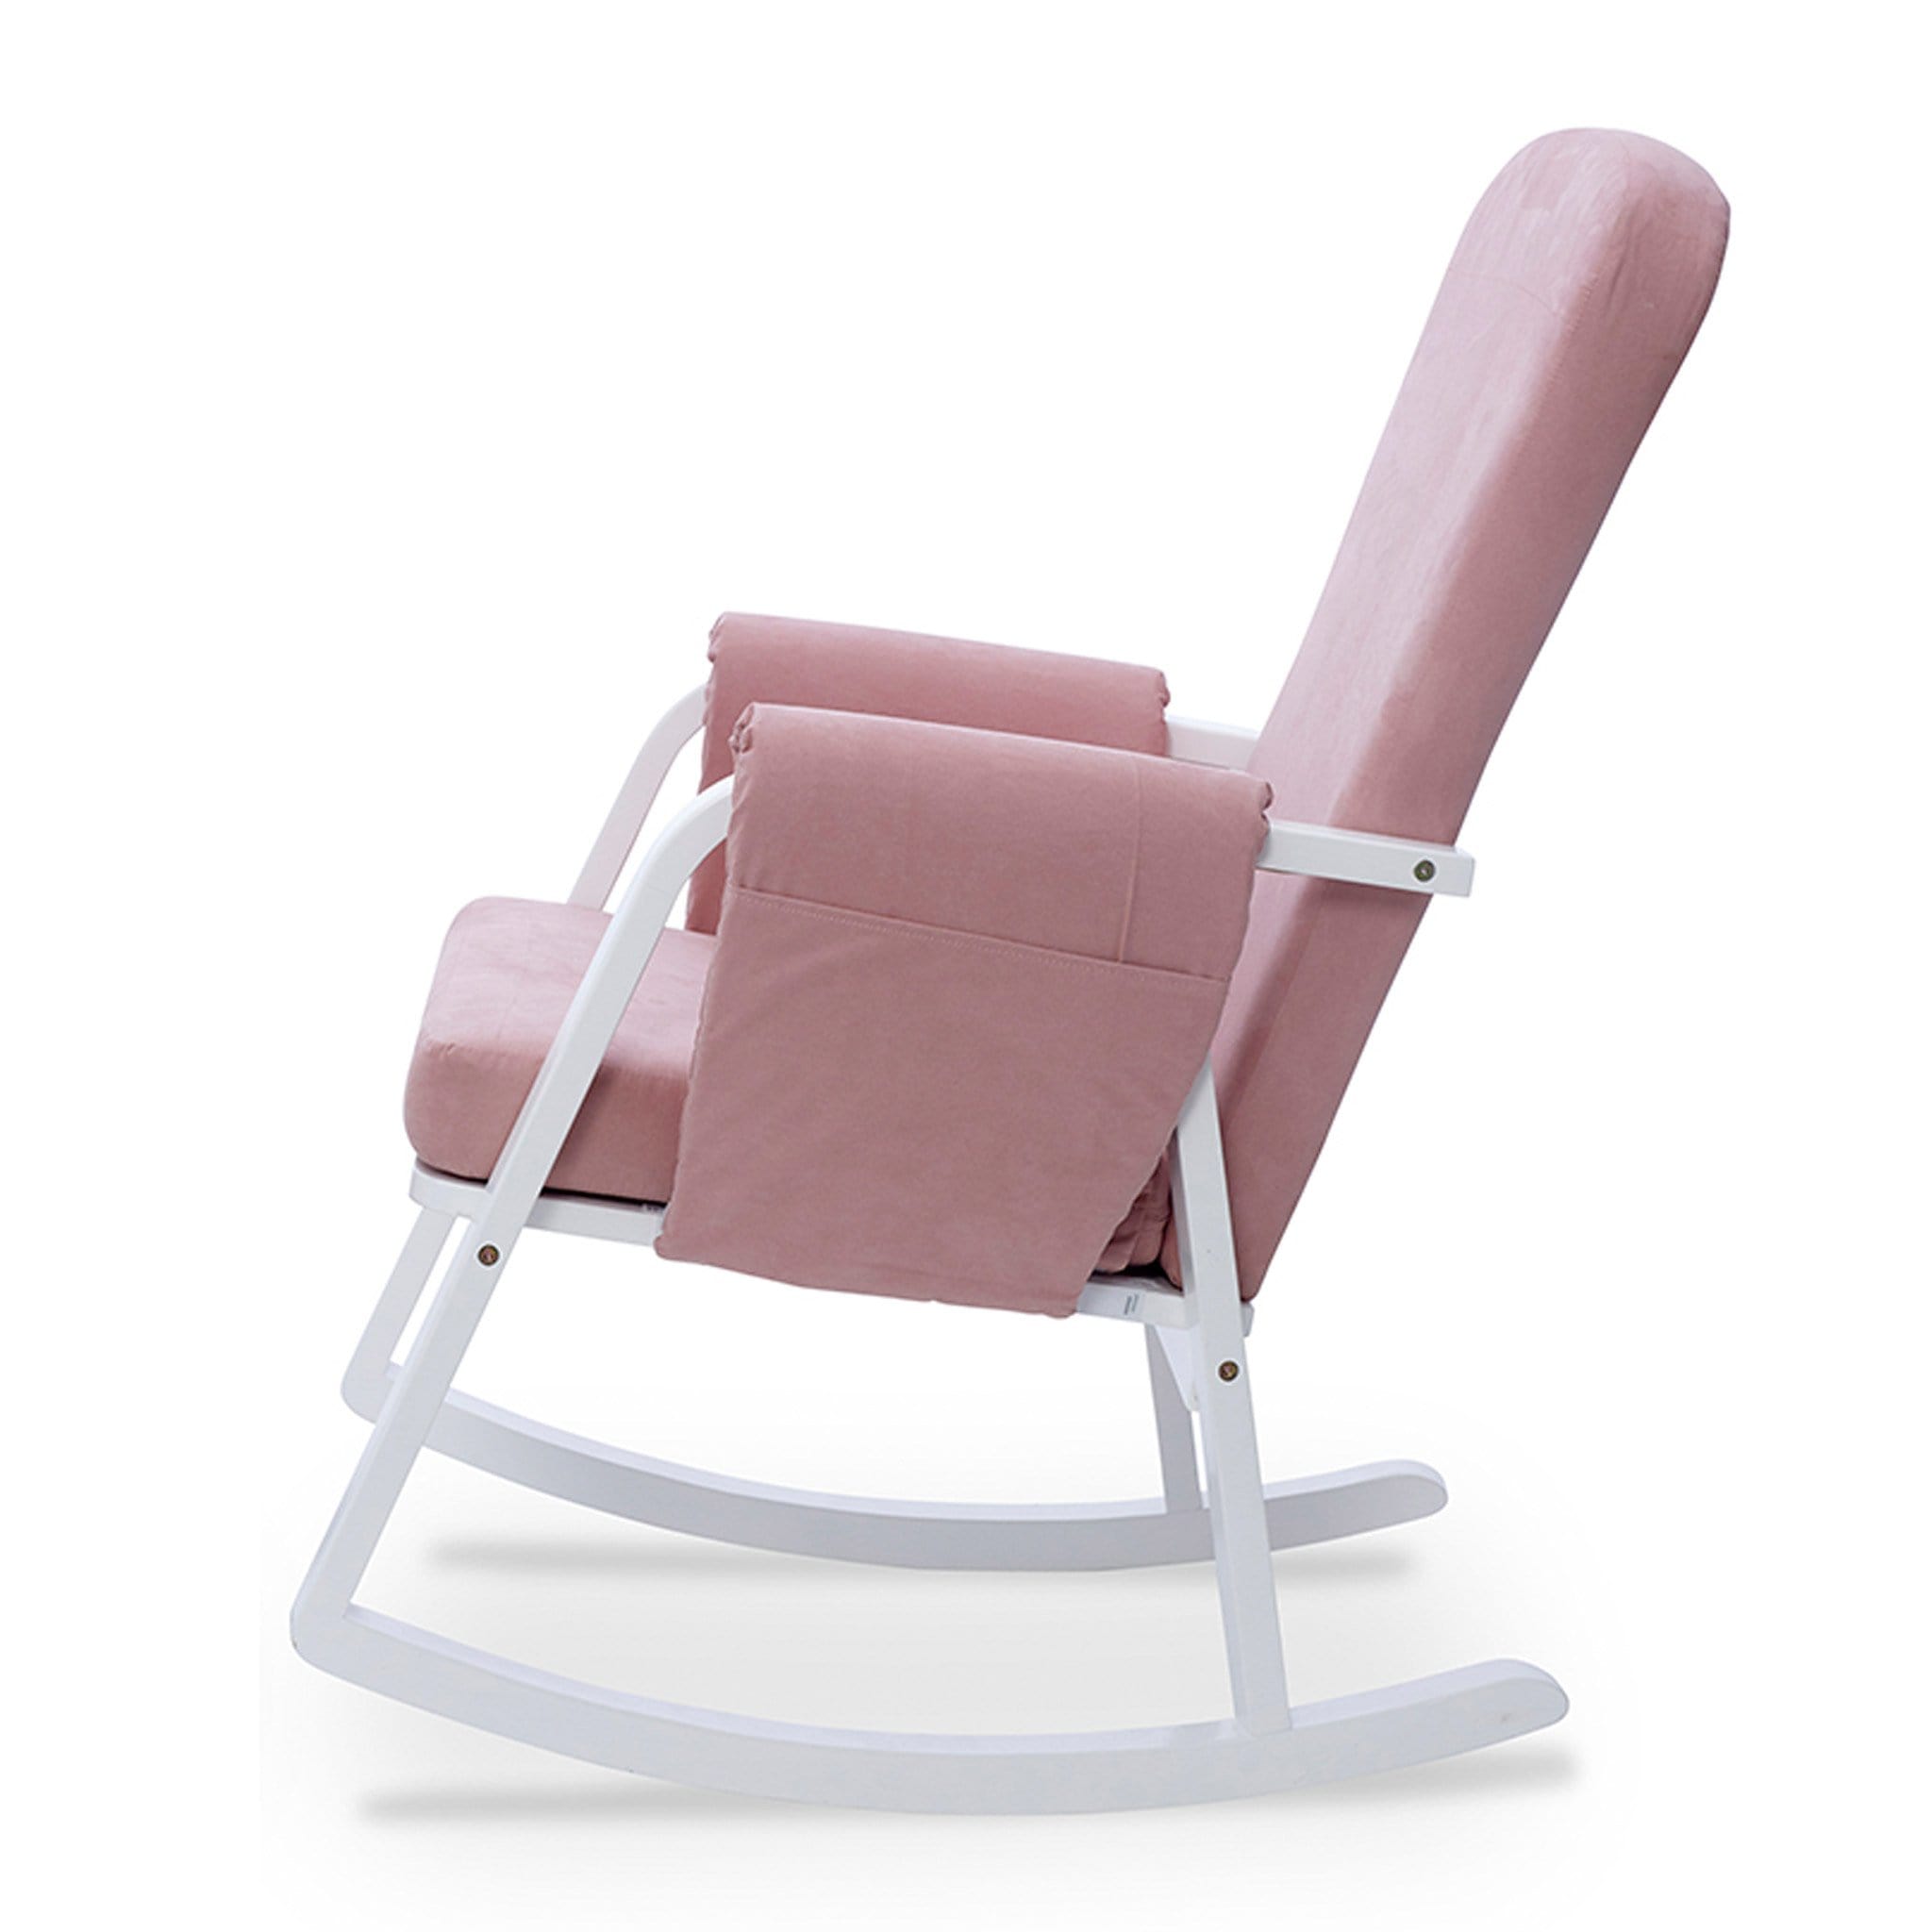 Ickle Bubba Dursley Rocking Chair and Stool Blush Pink Nursing Chairs 48-005-000-841 5060738074334